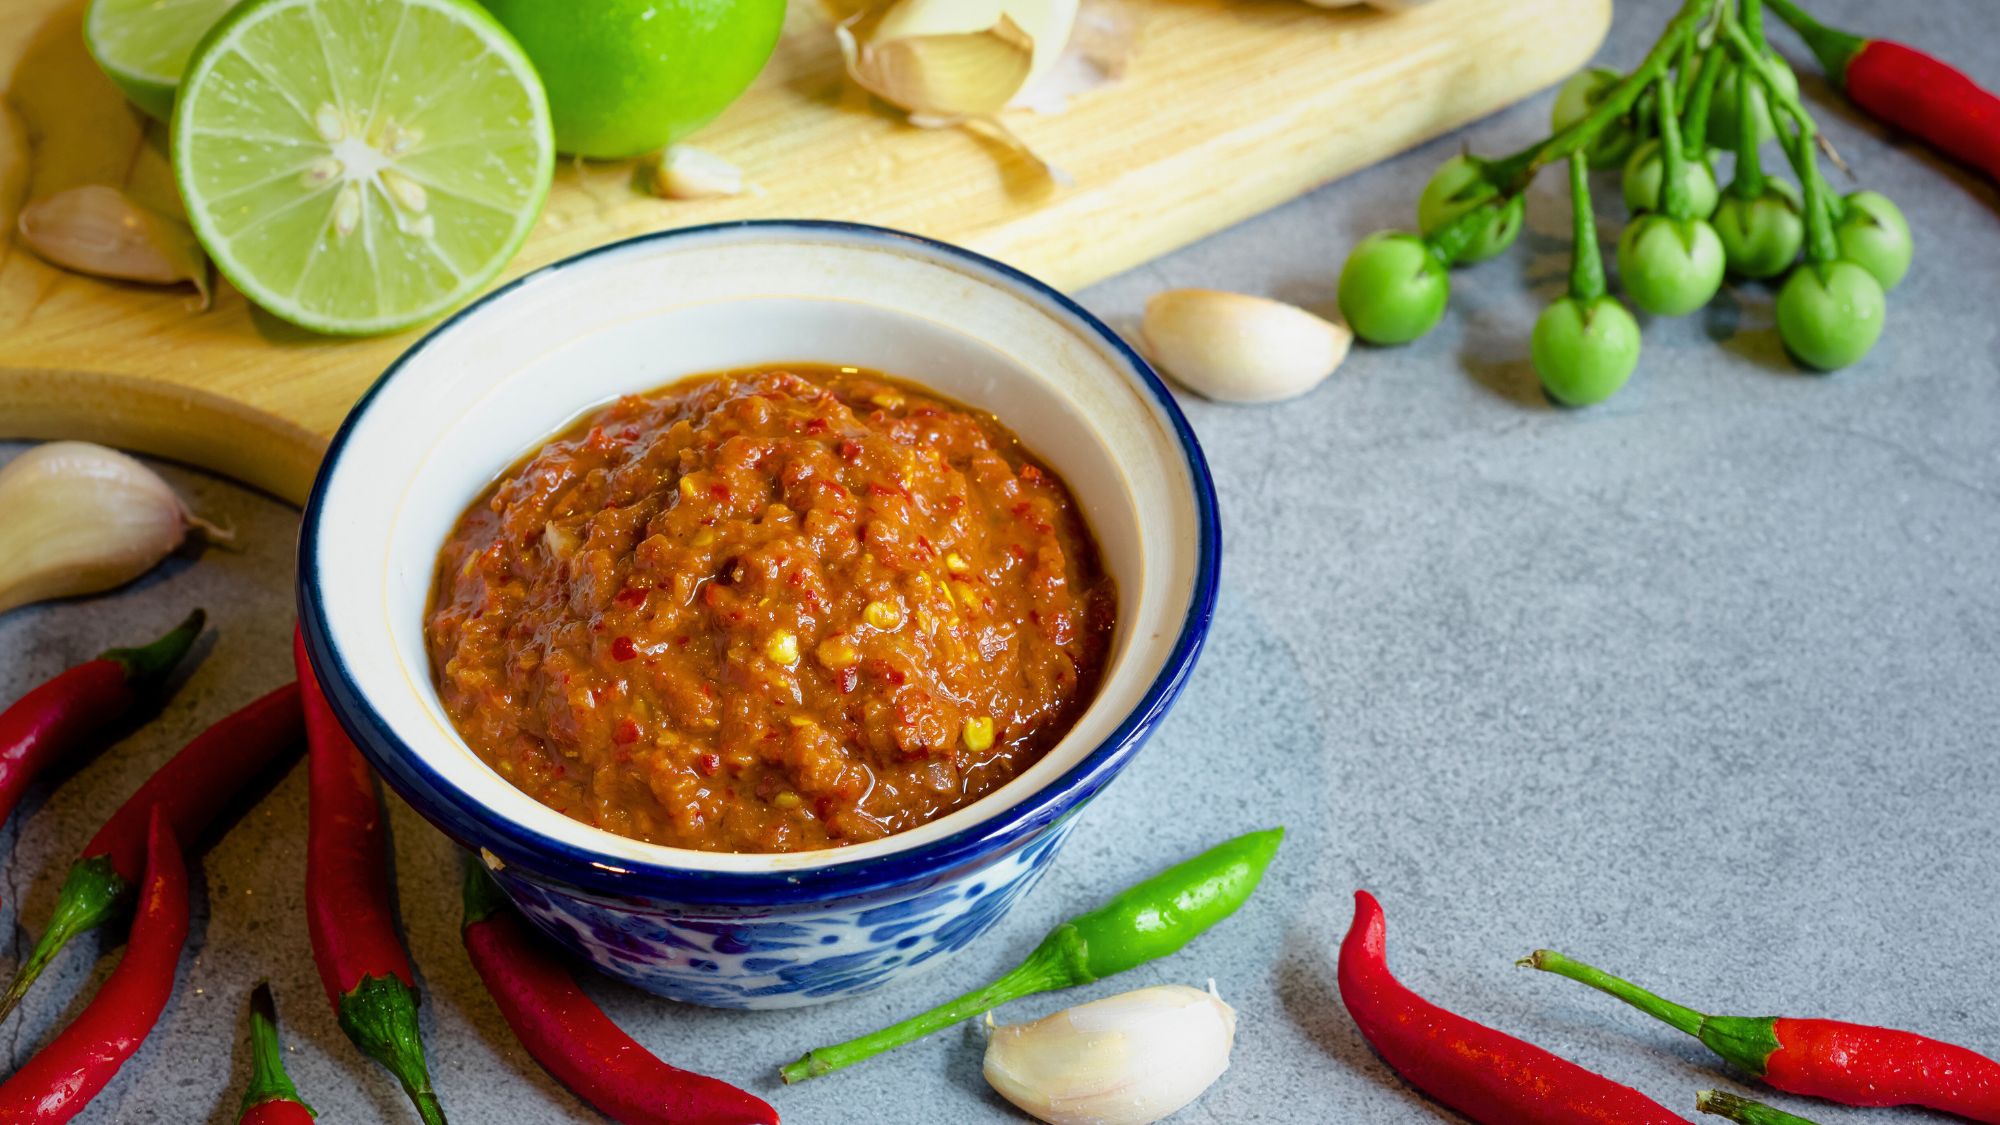 A bowl of cyrry paste, perfect for adding flavor to your gluten-free curry recipe.